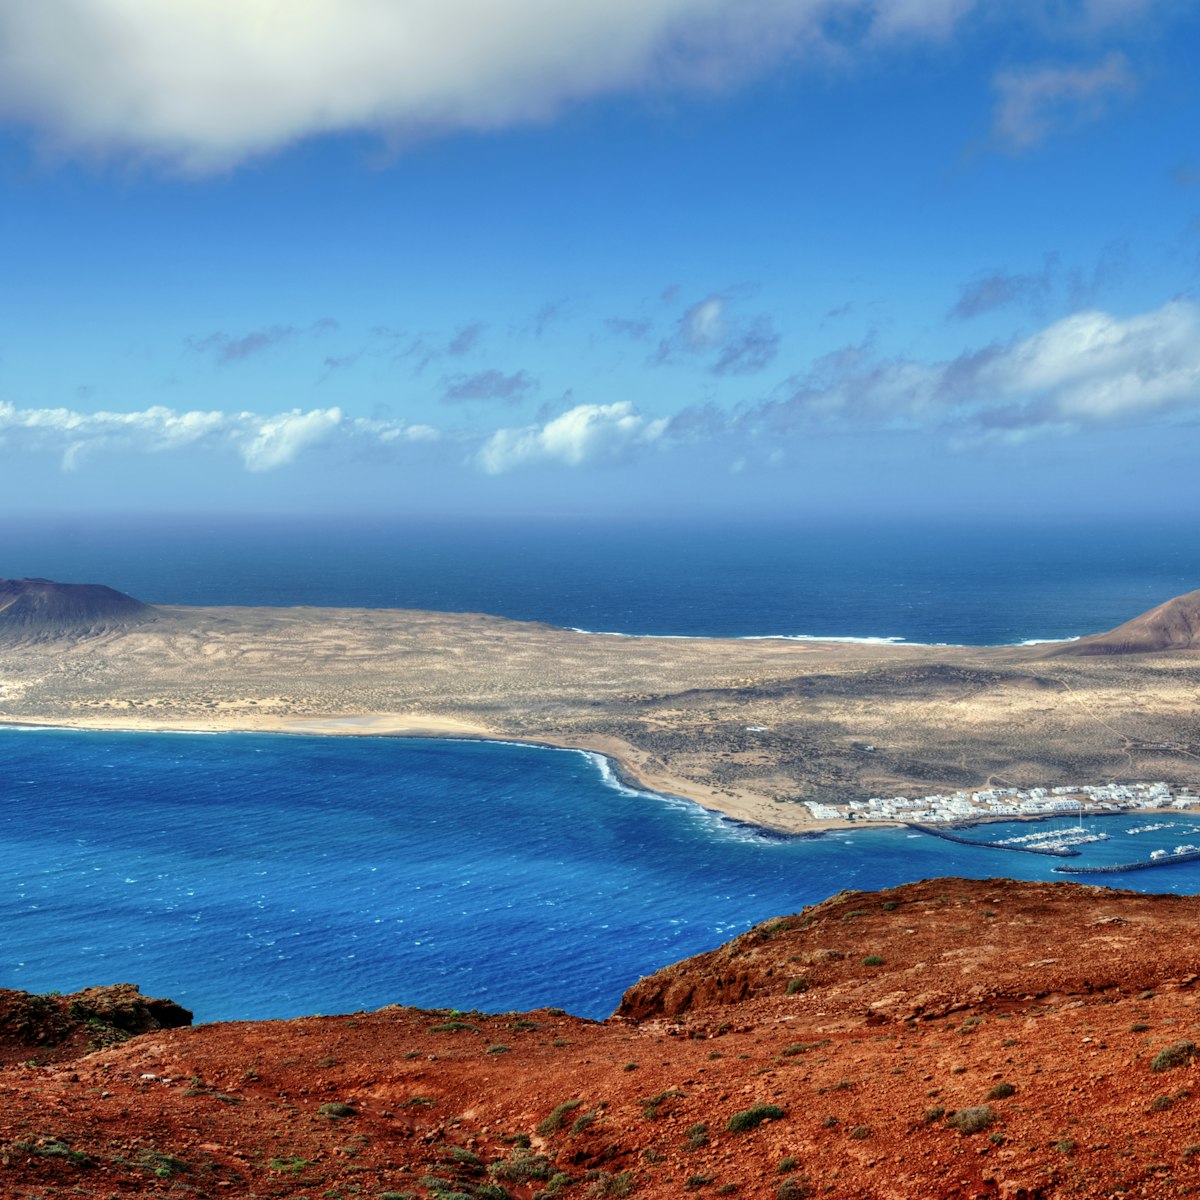 The Island of La Graciosa and the port of Caleta del Sebo taken from the Mirador del Rio, a famous viewpoint on Lanzarote, in the Spanish Canary Islands.; Shutterstock ID 74001898; Your name (First / Last): Tom Stainer; GL account no.: 65050 ; Netsuite department name: Online Editorial; Full Product or Project name including edition: Best in Travel 2018